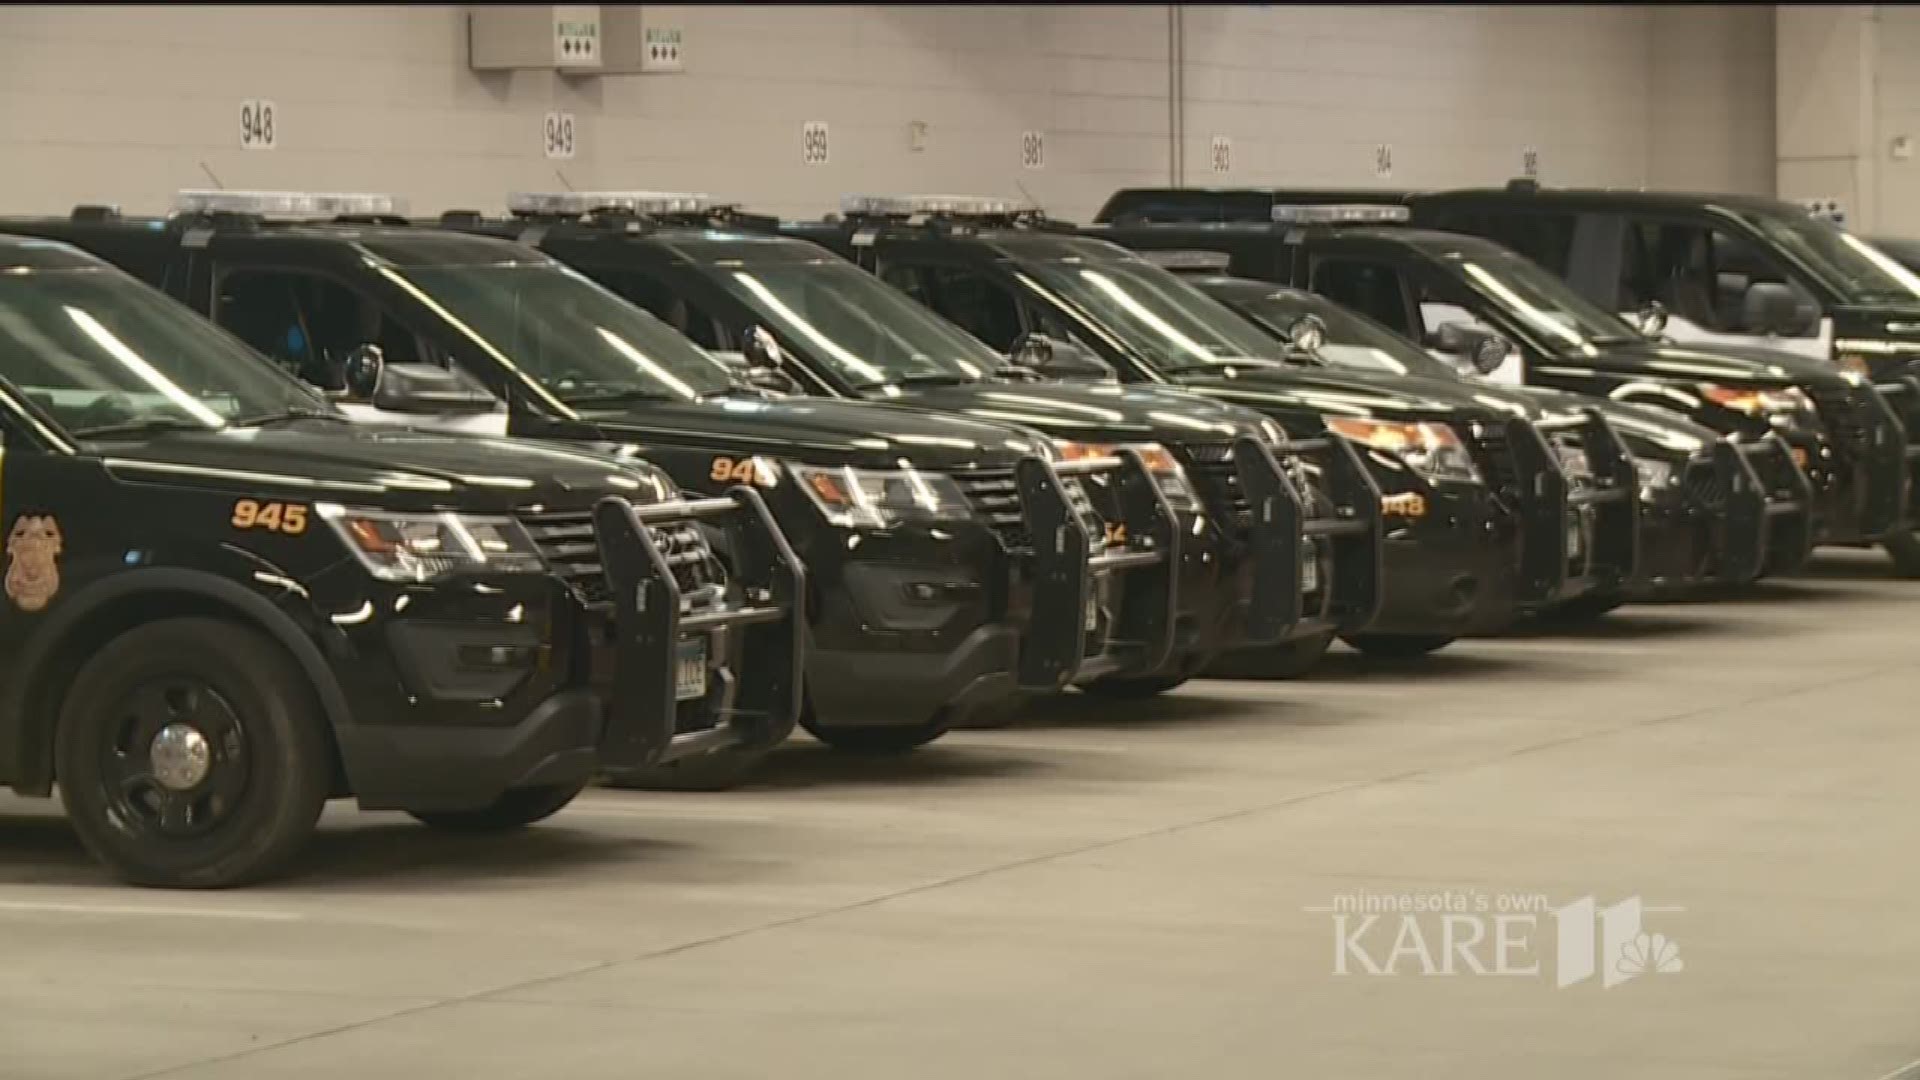  A former manager at an auto dealership  is now facing criminal swindling charges as the result of a KARE 11 investigation that exposed law enforcement agencies across Minnesota have been getting ripped off on their squad car purchases for years.